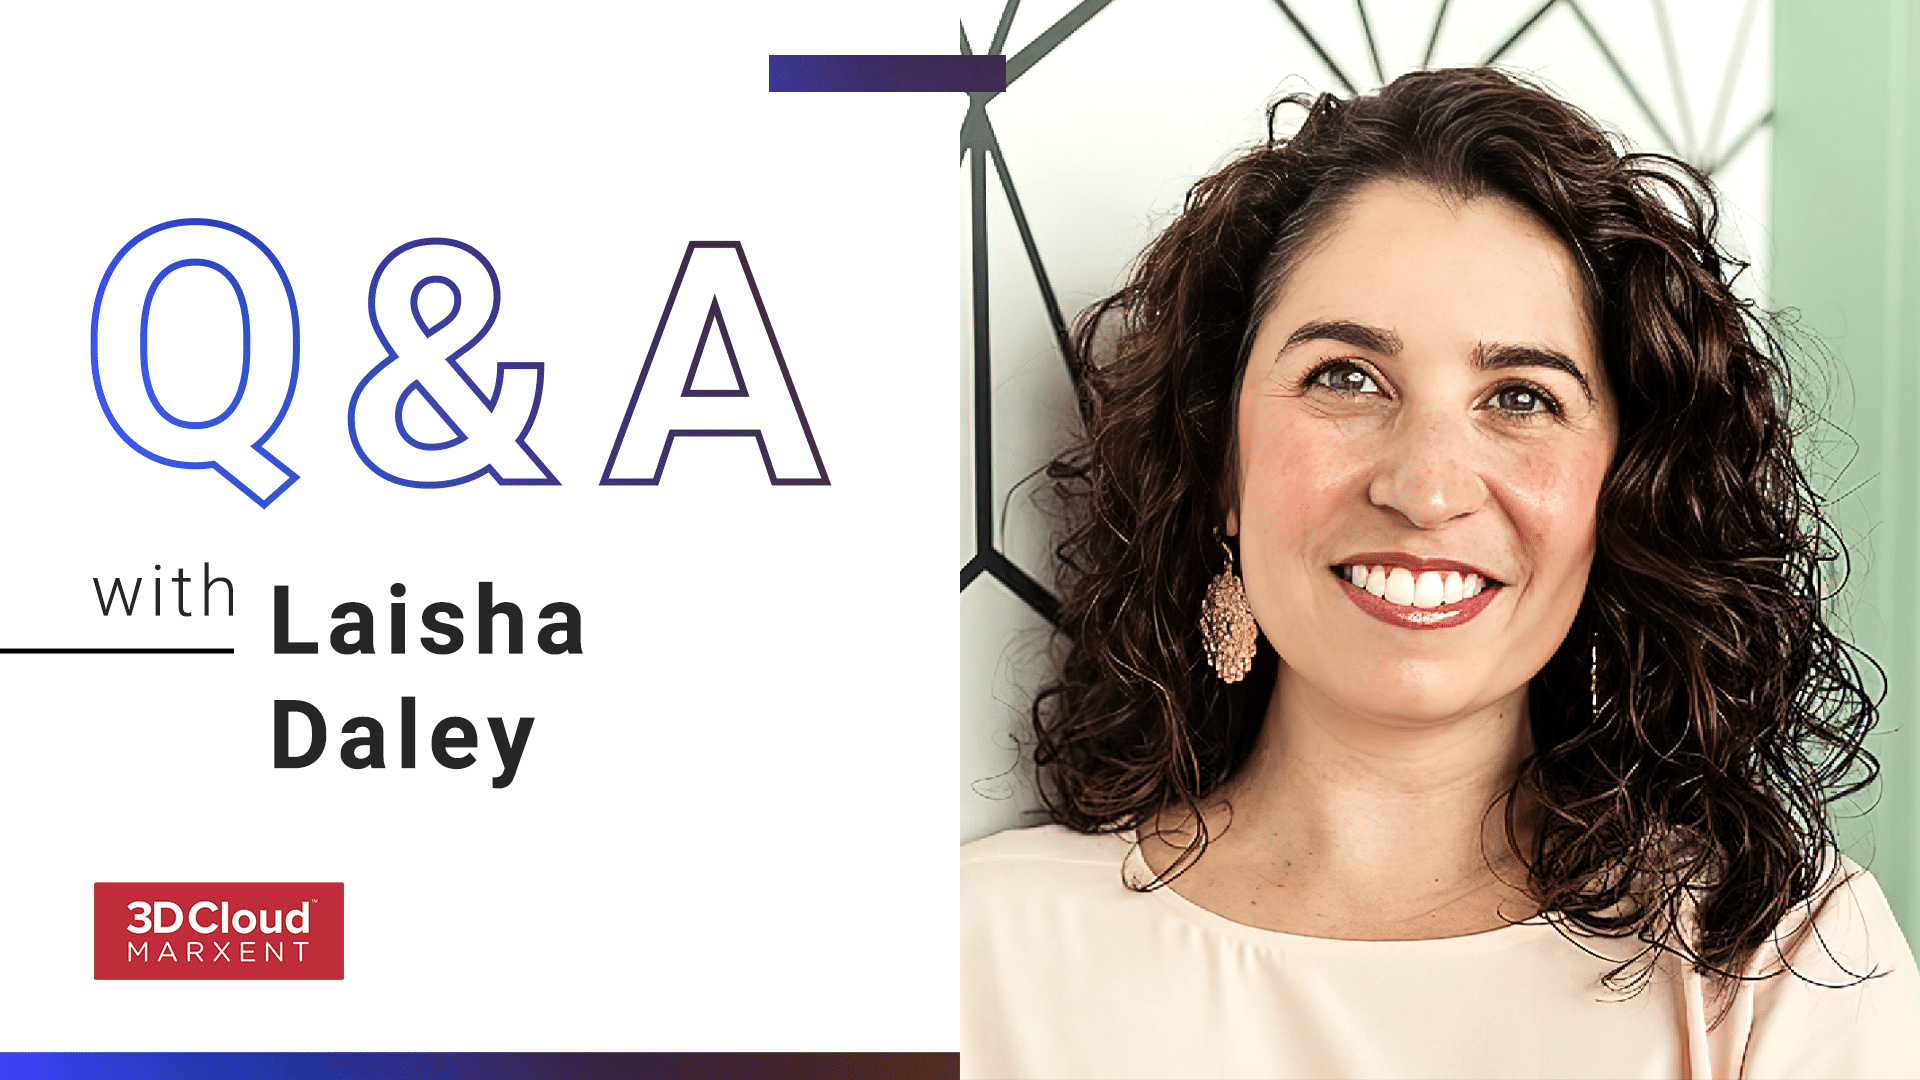 Employee Q&A with Laisha Daley